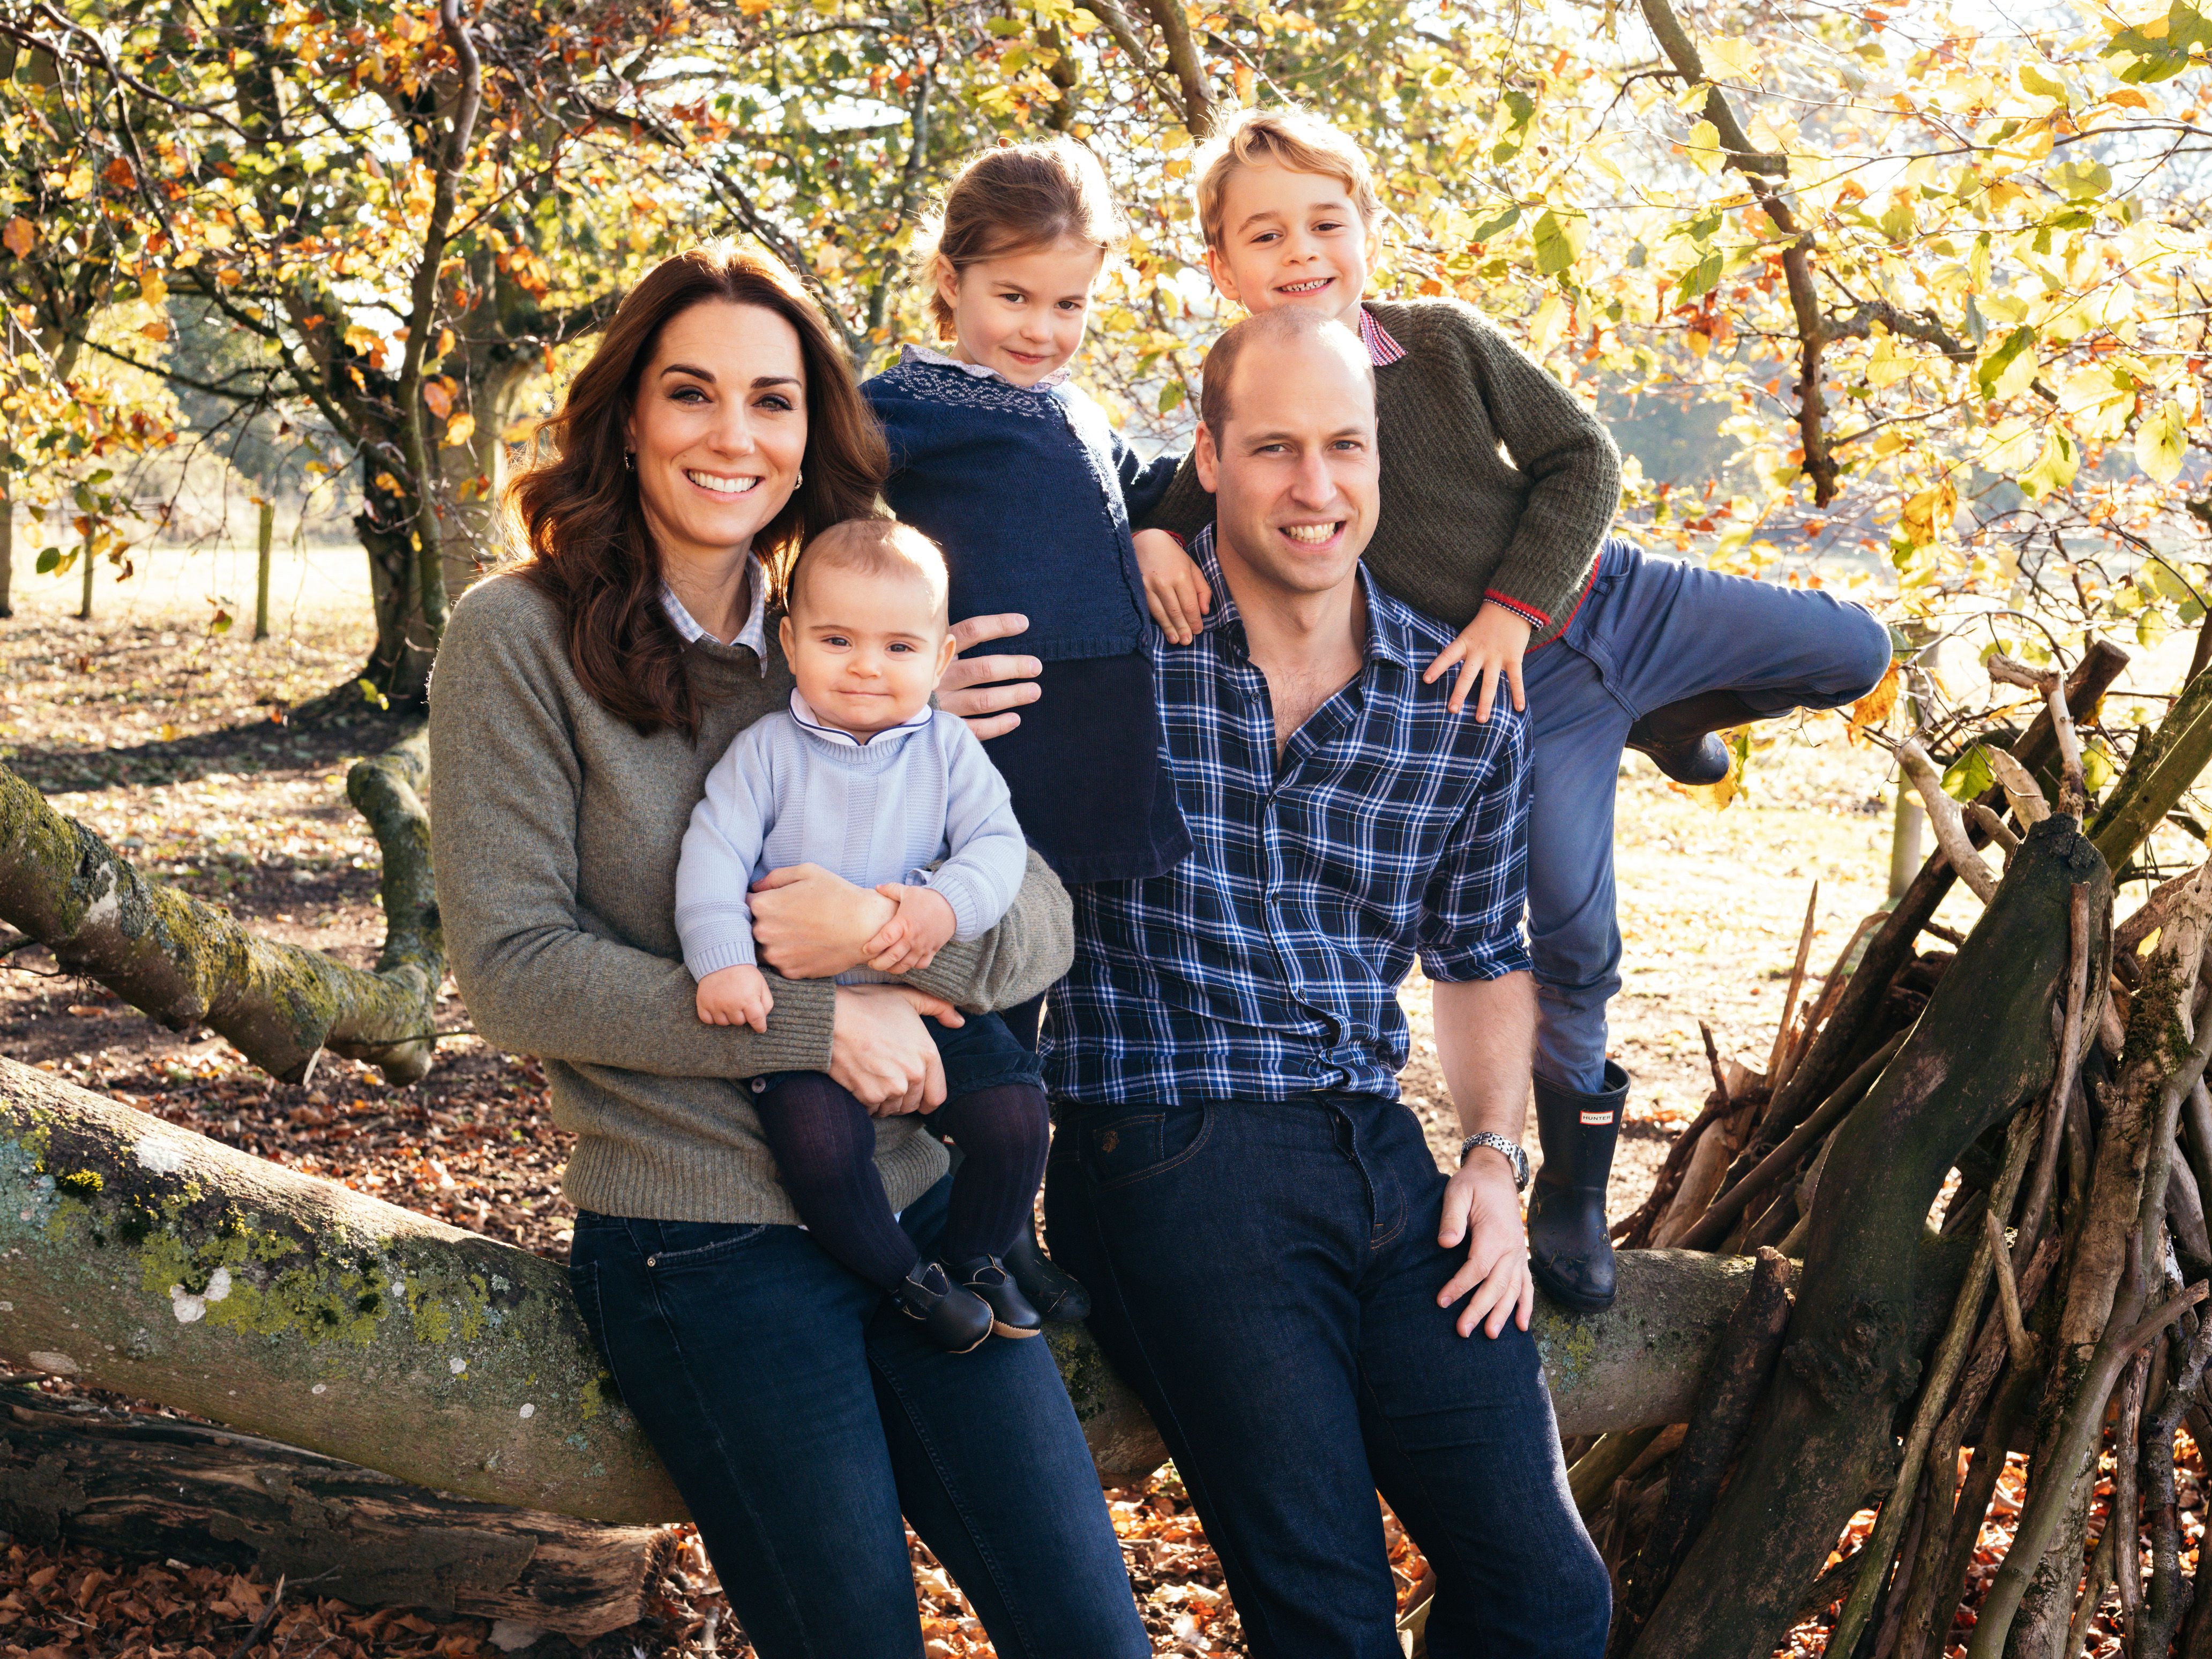 Prince William's Kids With Kate Meet Their Children